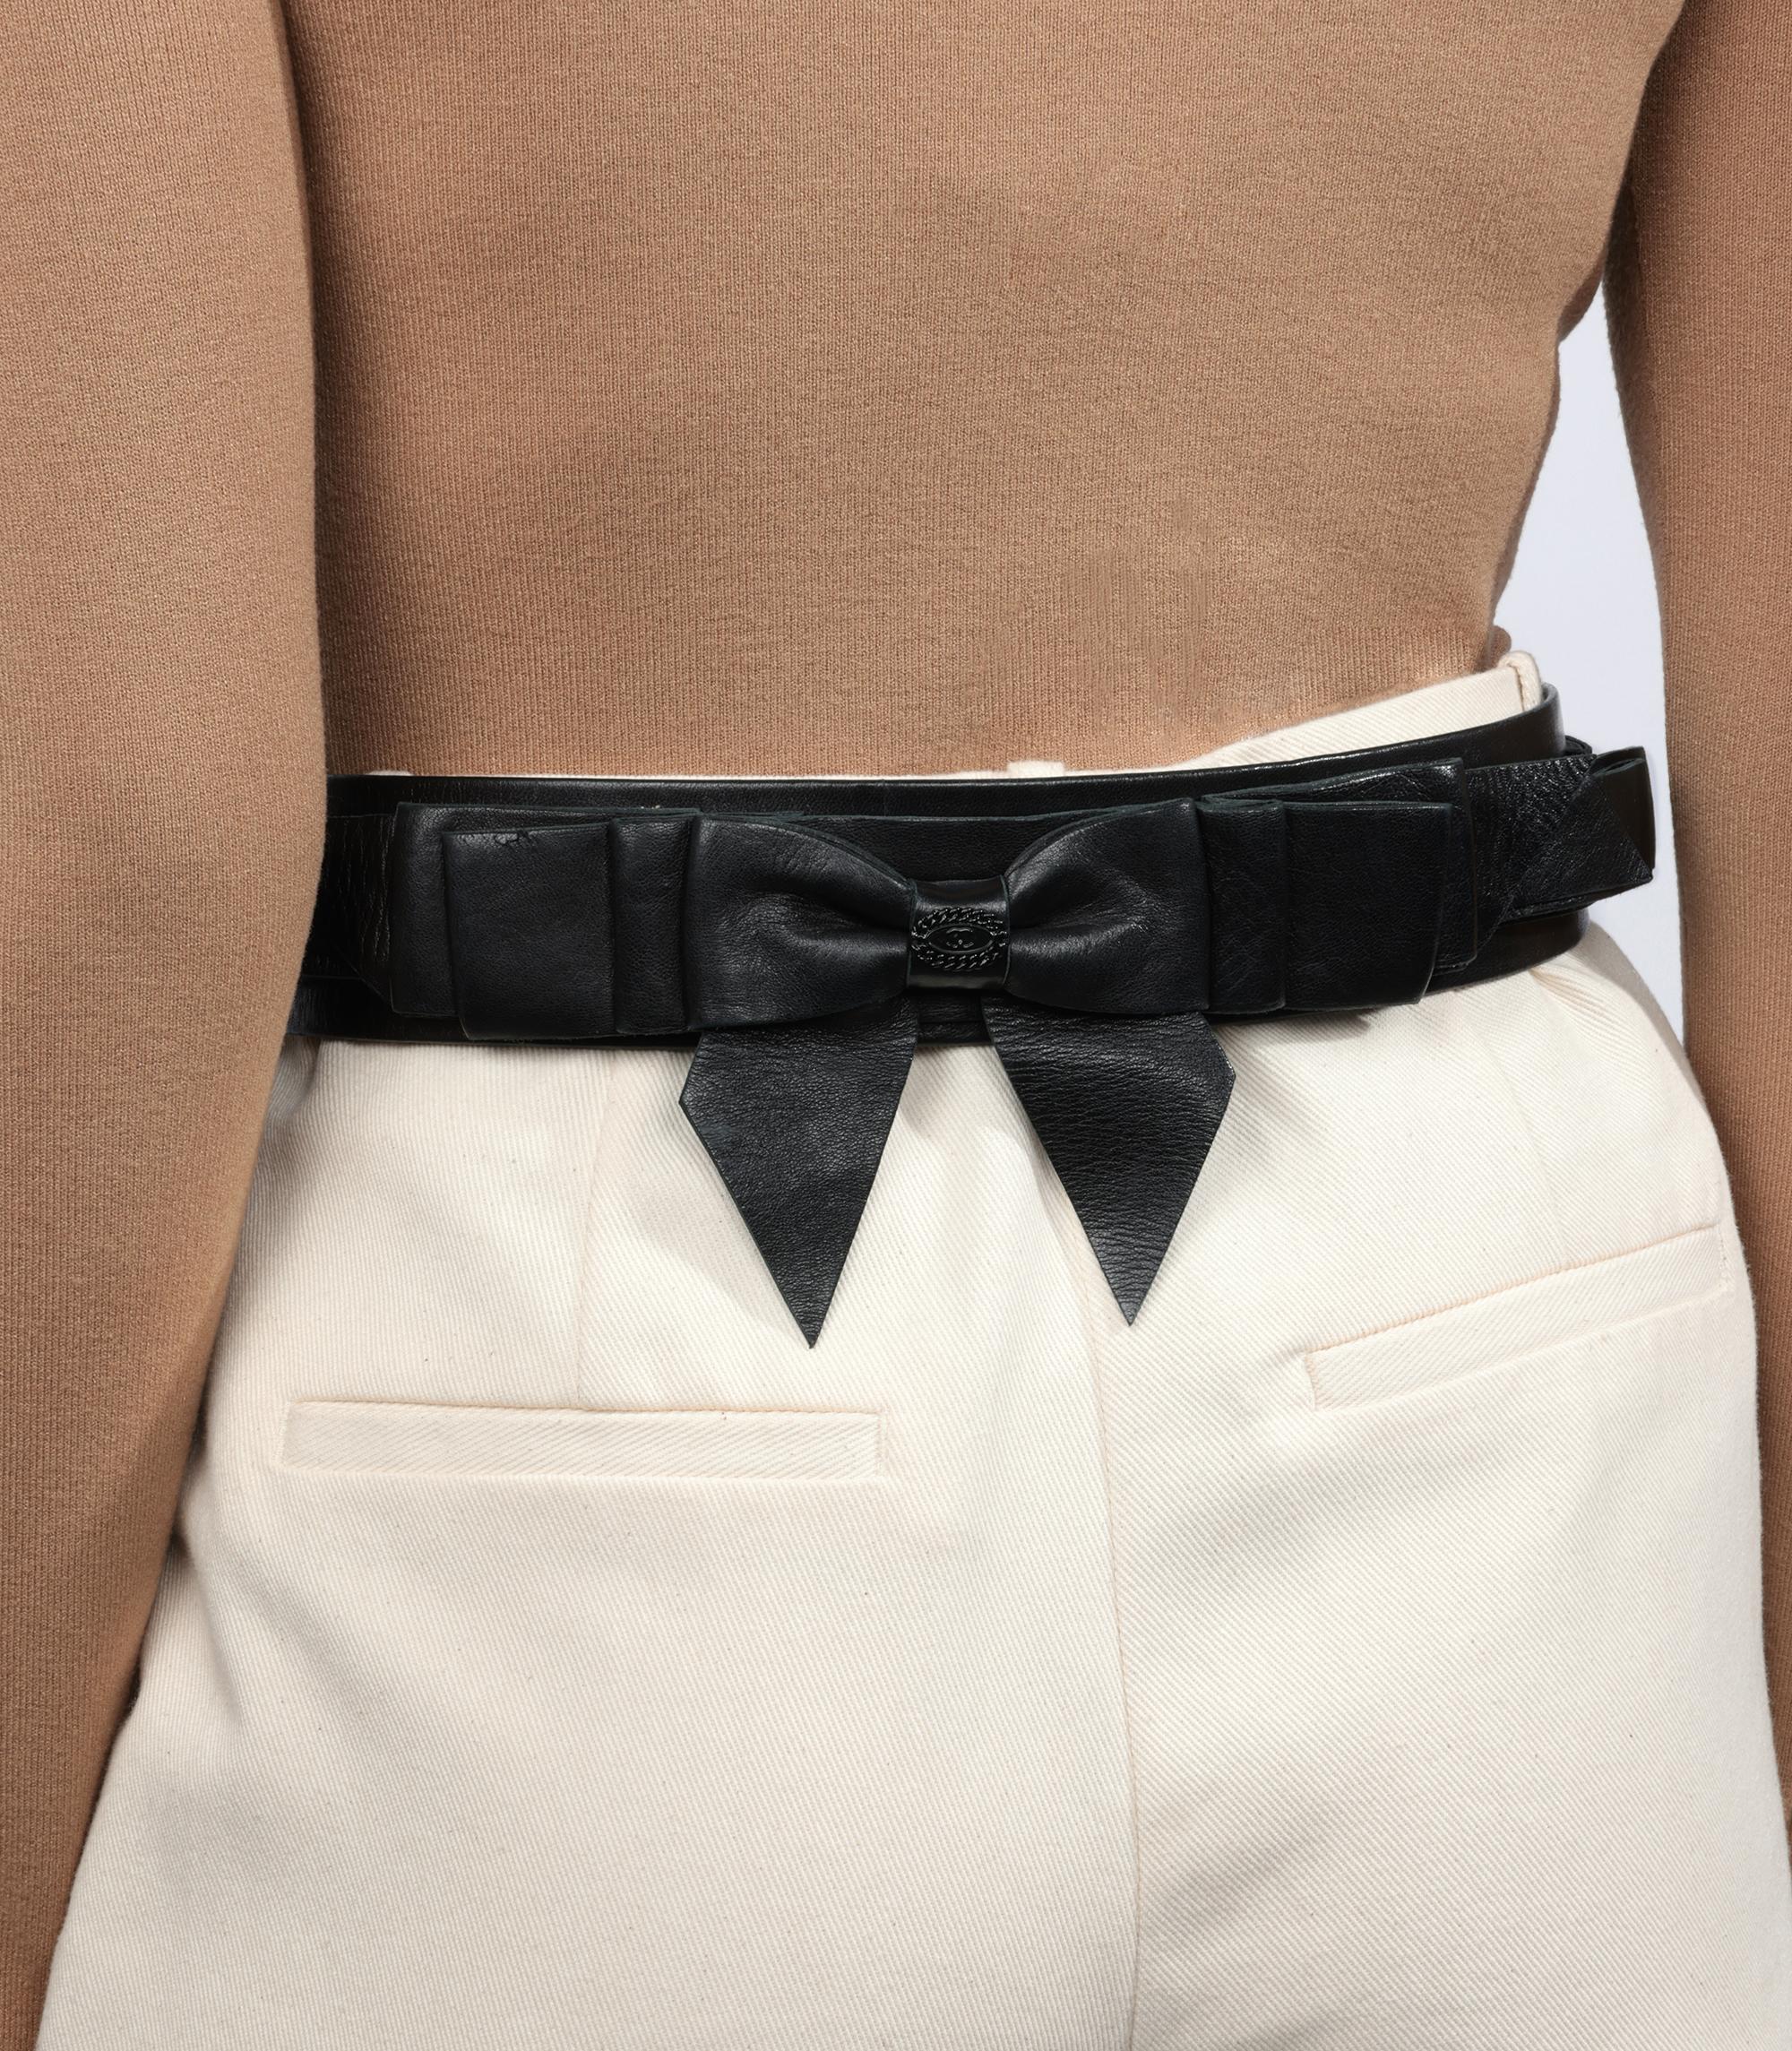 Chanel Black Layered Lambskin Leather Bow Belt

Brand- Chanel
Model- Bow Belt
Product Type- Belt
Serial Number- 8:00 PM
Age- Circa 2008
Colour- Black
Hardware- Acrylic
Material(s)- Leather
Authenticity Details- Date Stamp

Height- 5.1cm
Width-